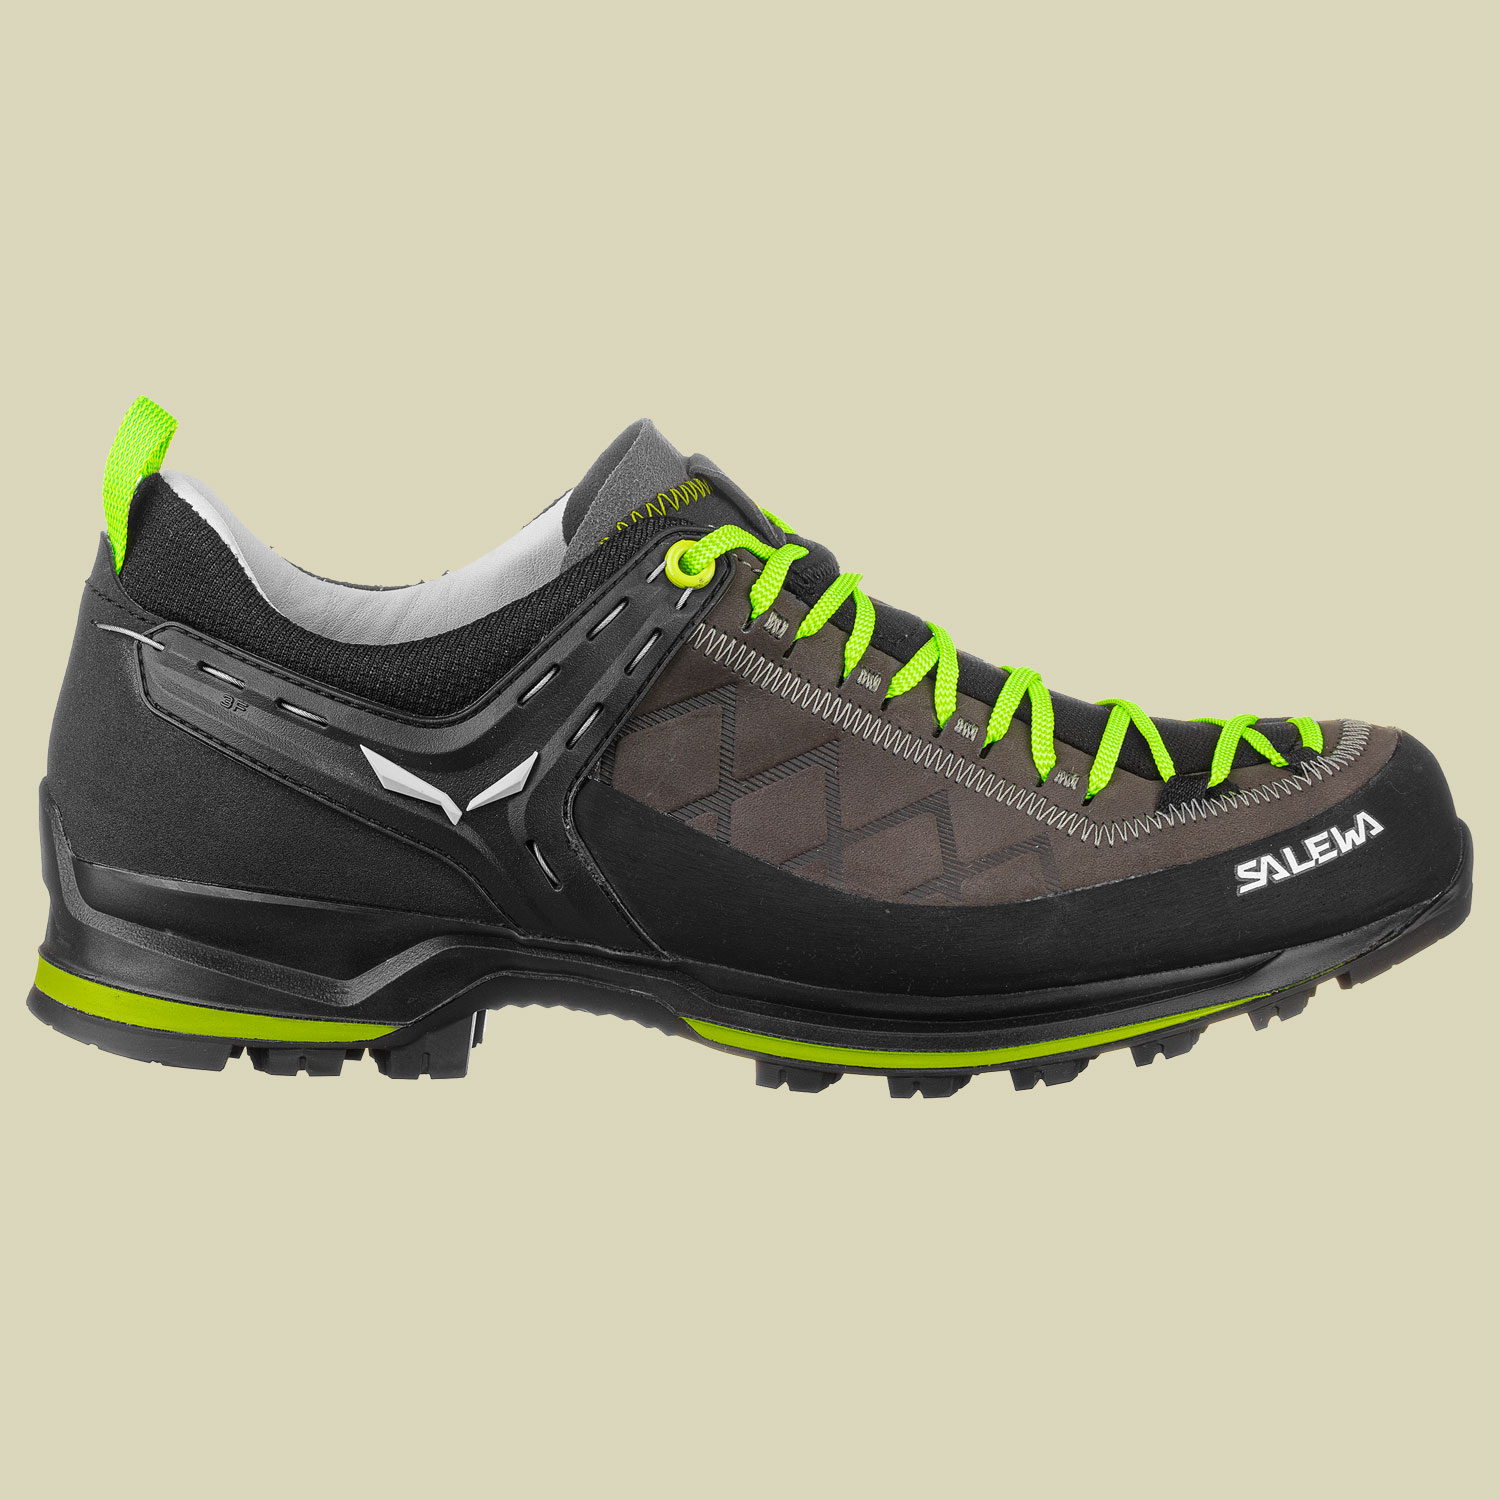 MS MTN Trainer 2 L Men Größe UK 11,5 Farbe smoked/fluo green